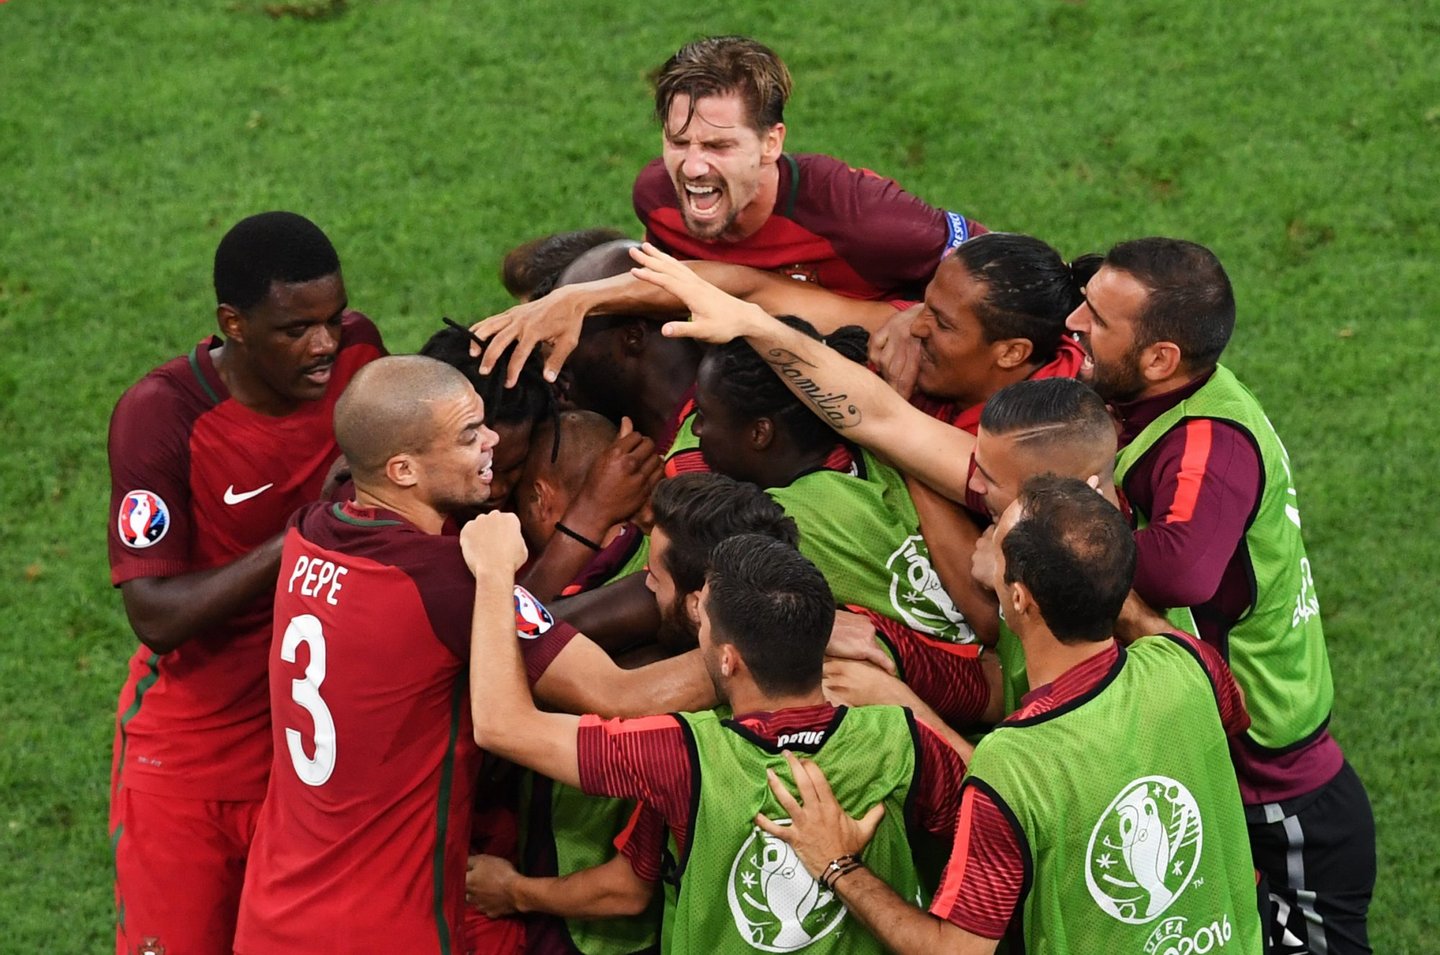 Portugal's midfielder Renato Sanches (R) celebrates with teammates after scoring during the Euro 2016 quarter-final football match between Poland and Portugal at the Stade Velodrome in Marseille on June 30, 2016. / AFP / BORIS HORVAT (Photo credit should read BORIS HORVAT/AFP/Getty Images)